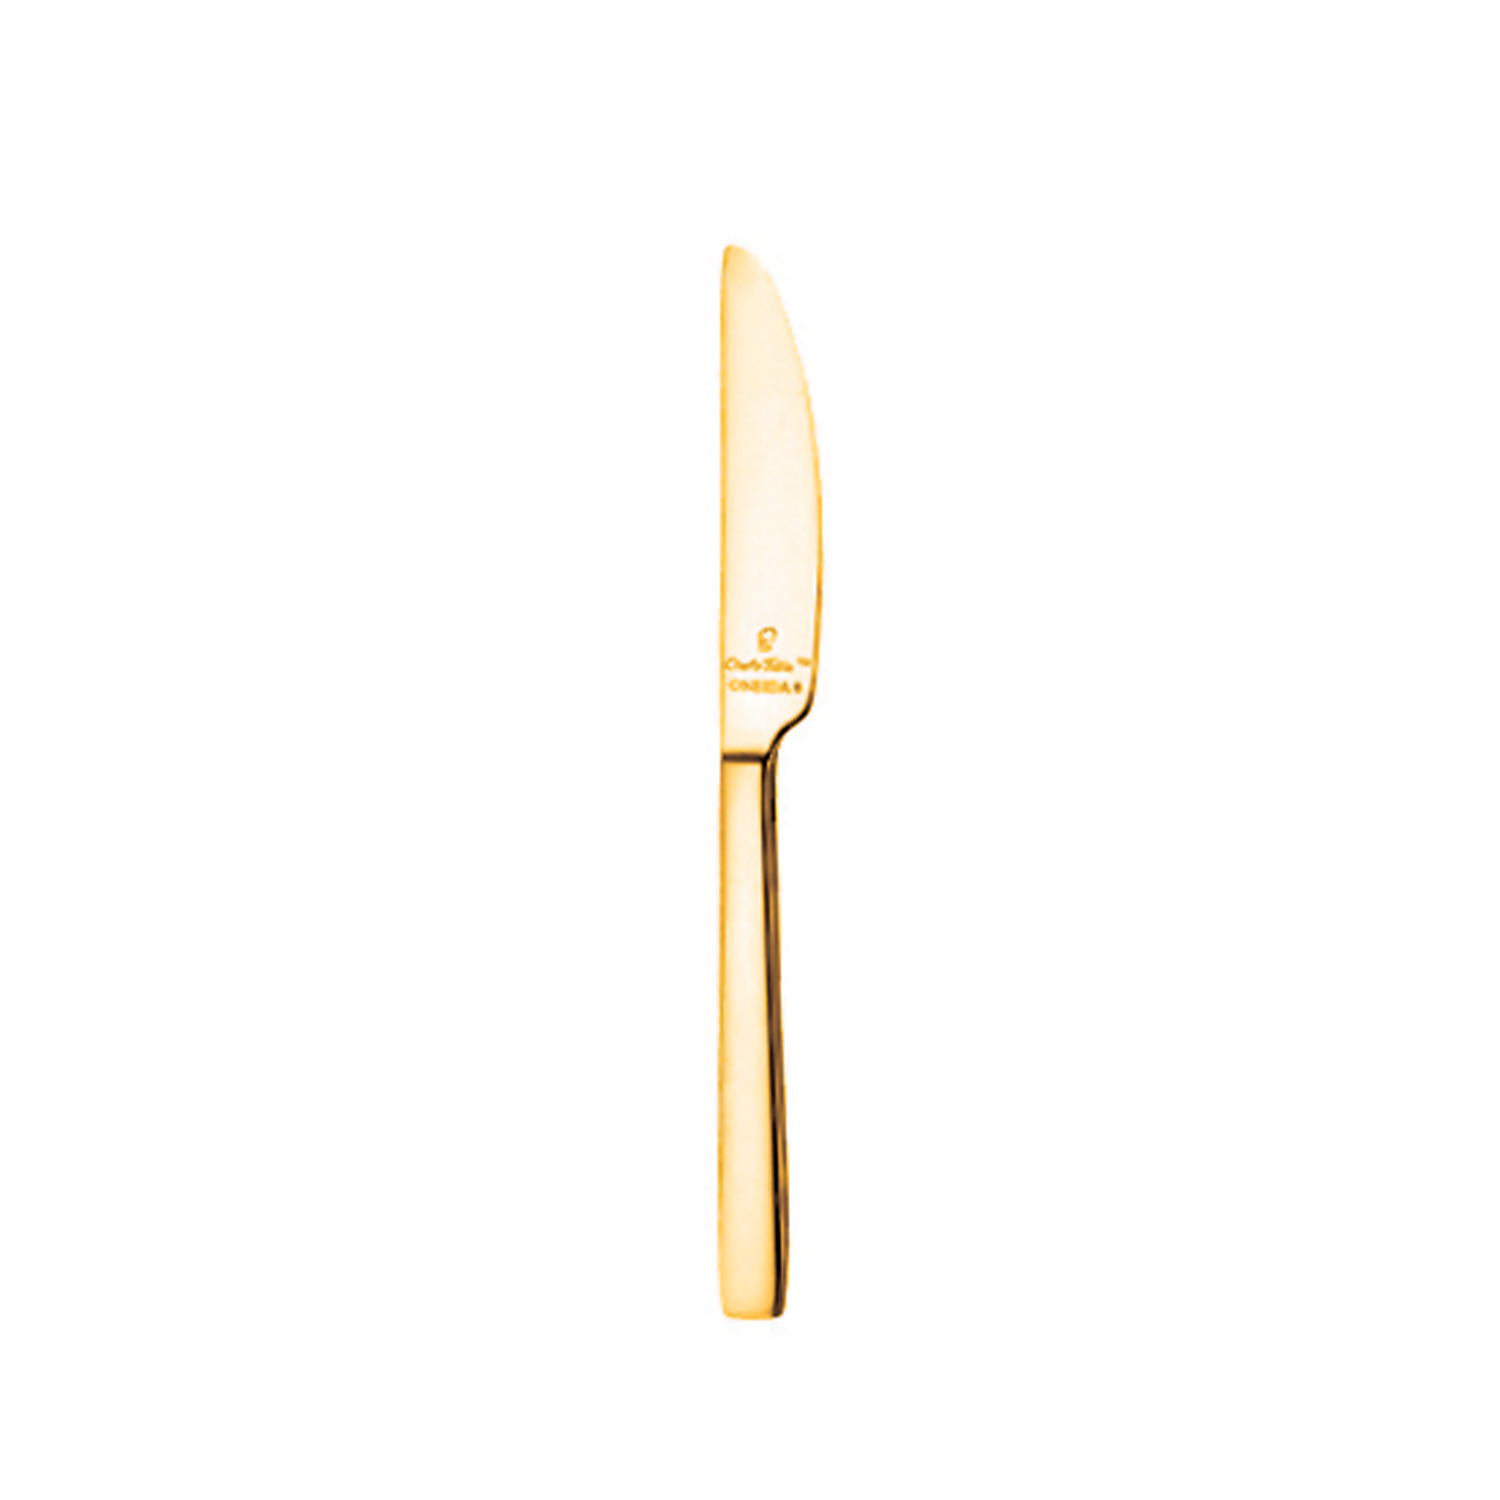 CHEF’S TABLE GOLD BUTTER SPREADER